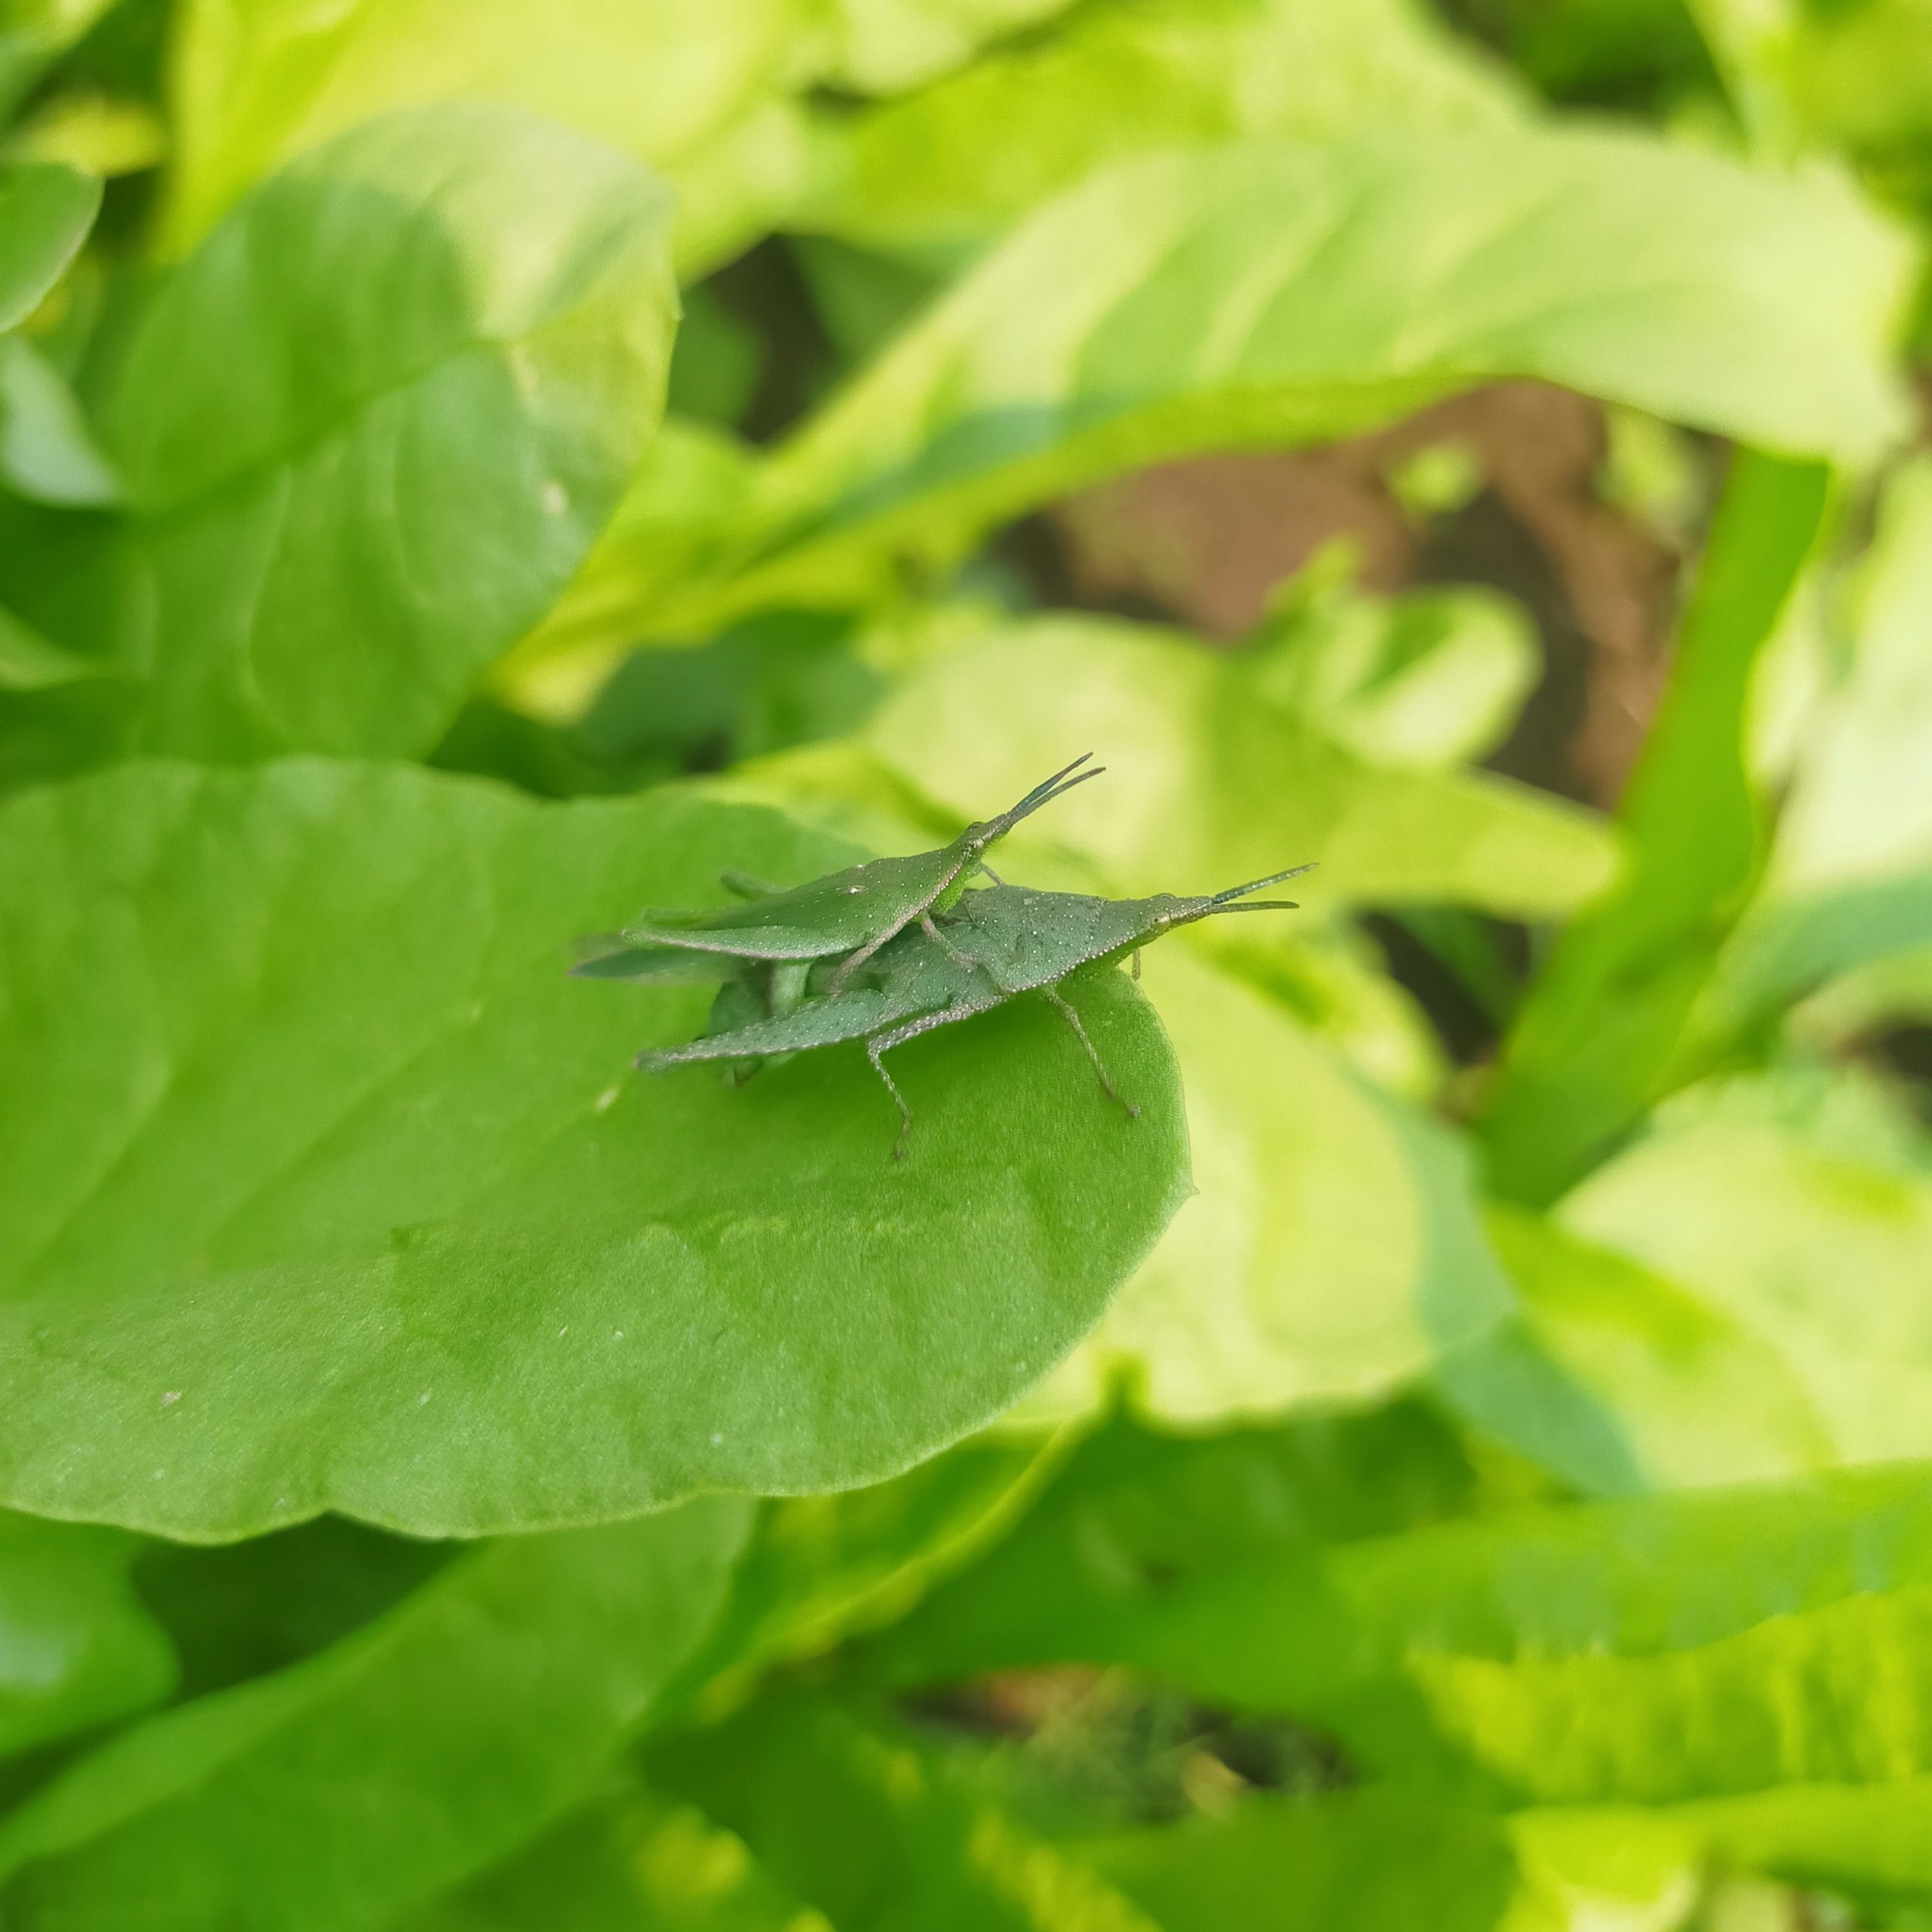 Grasshoppers on a leaf